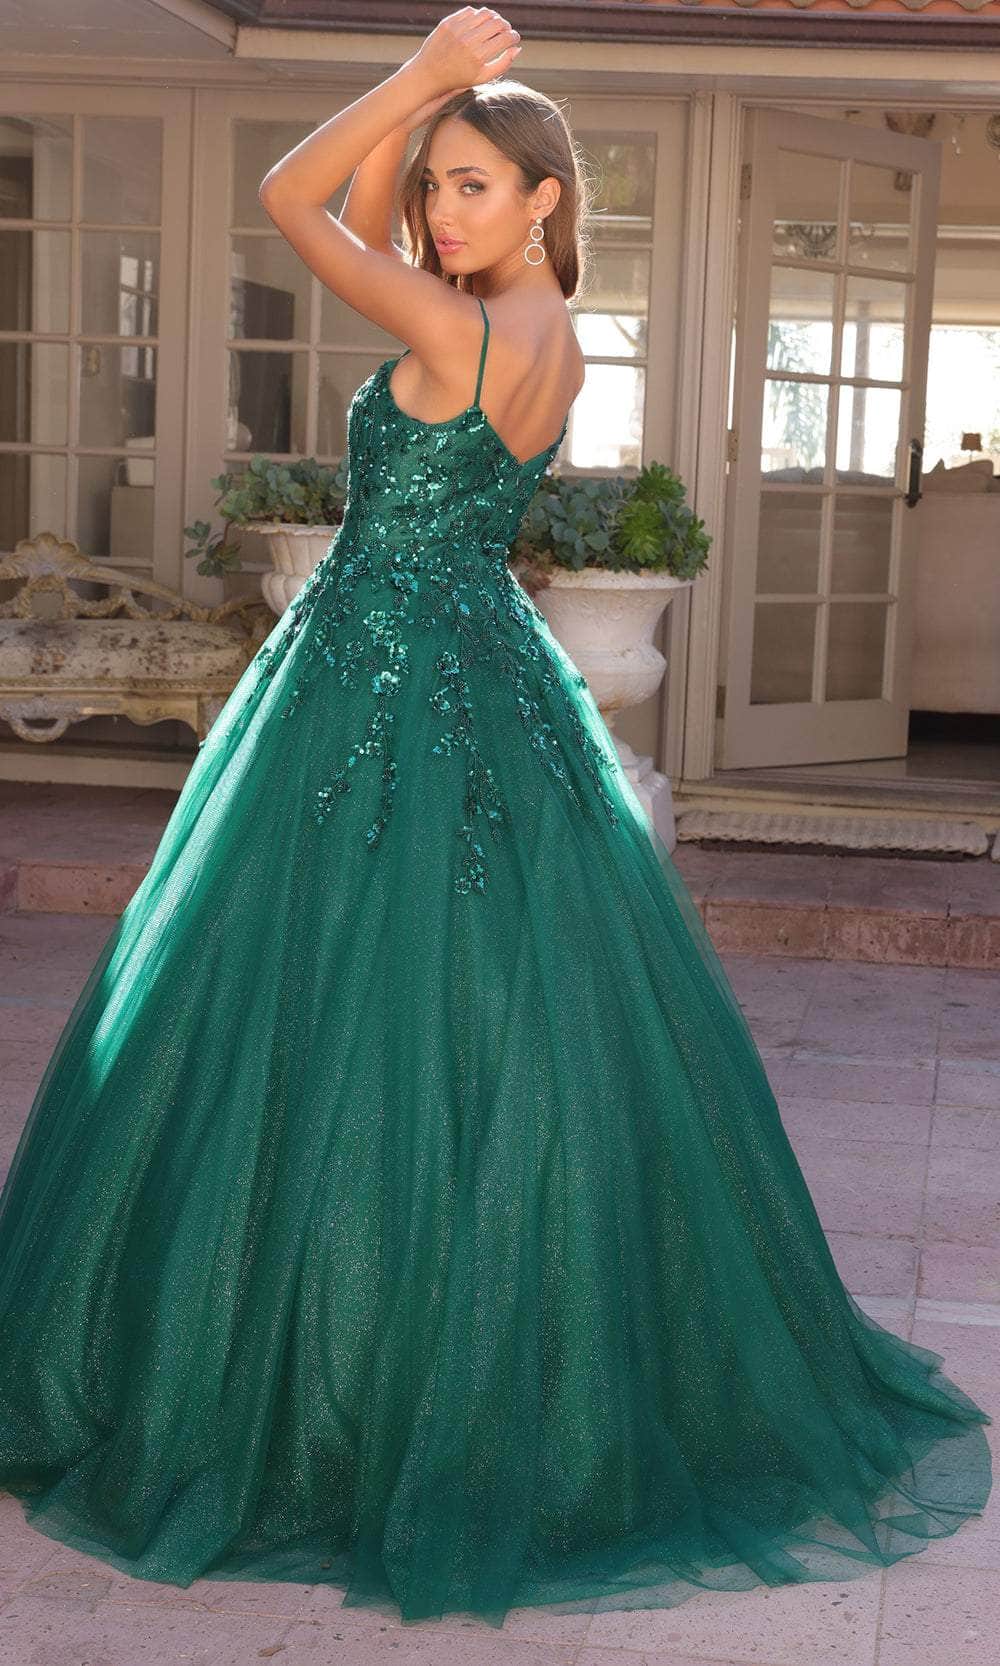 Nox Anabel H1464 - Glitter A-Line Prom Dress Special Occasion Dresses 